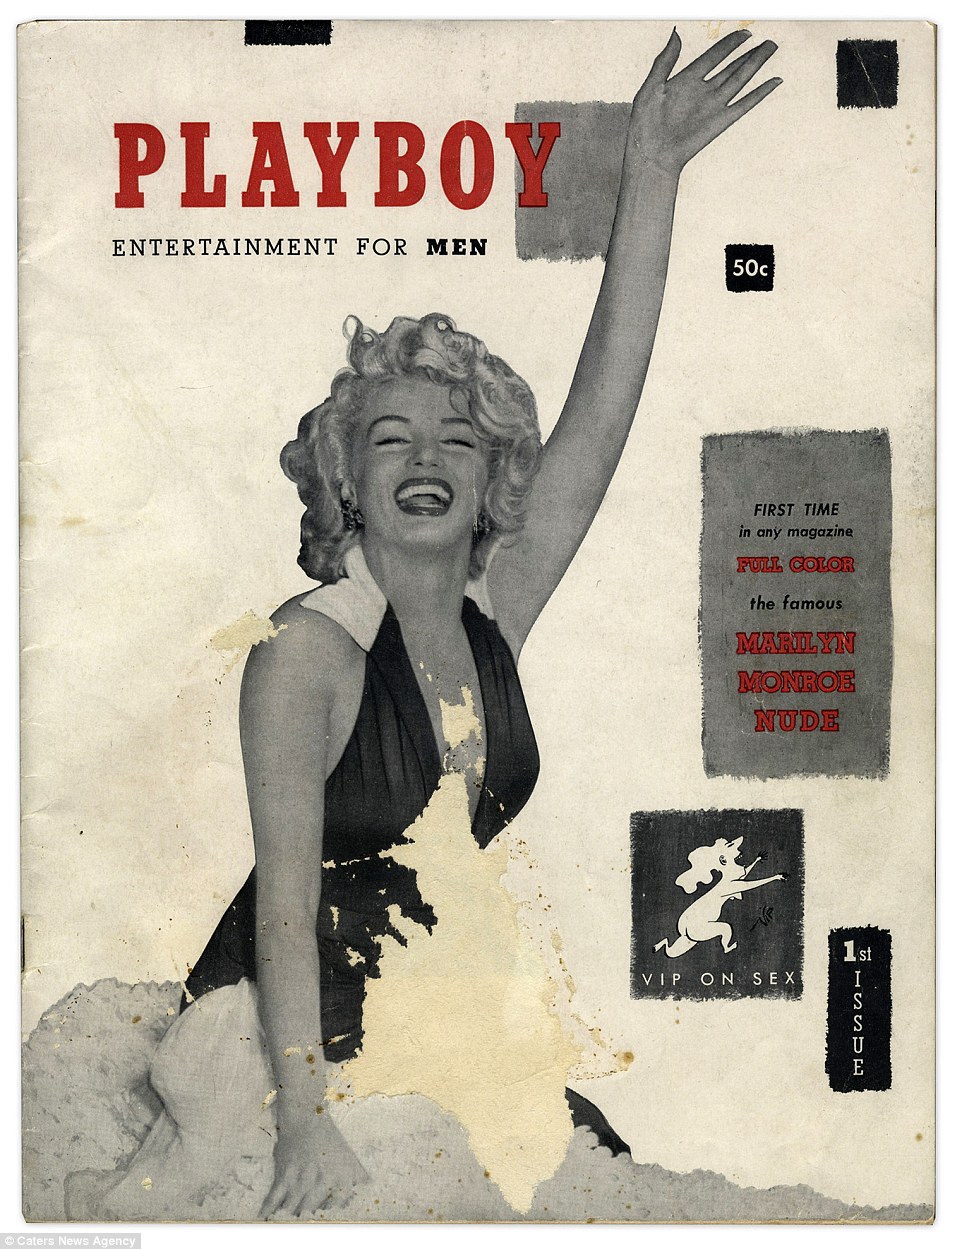 Playboy first cover